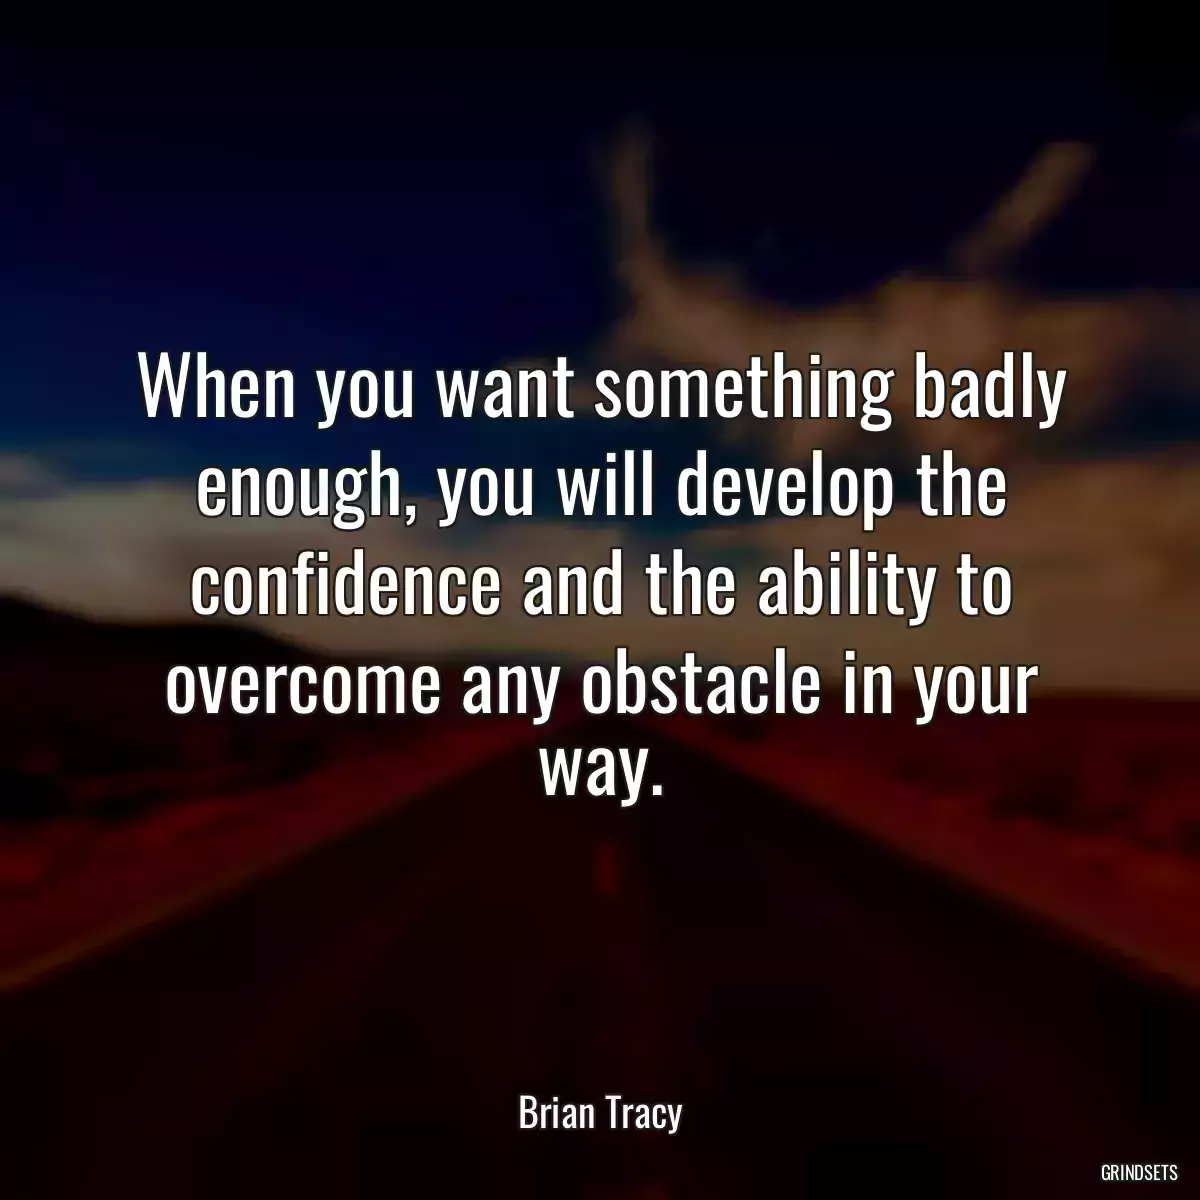 When you want something badly enough, you will develop the confidence and the ability to overcome any obstacle in your way.